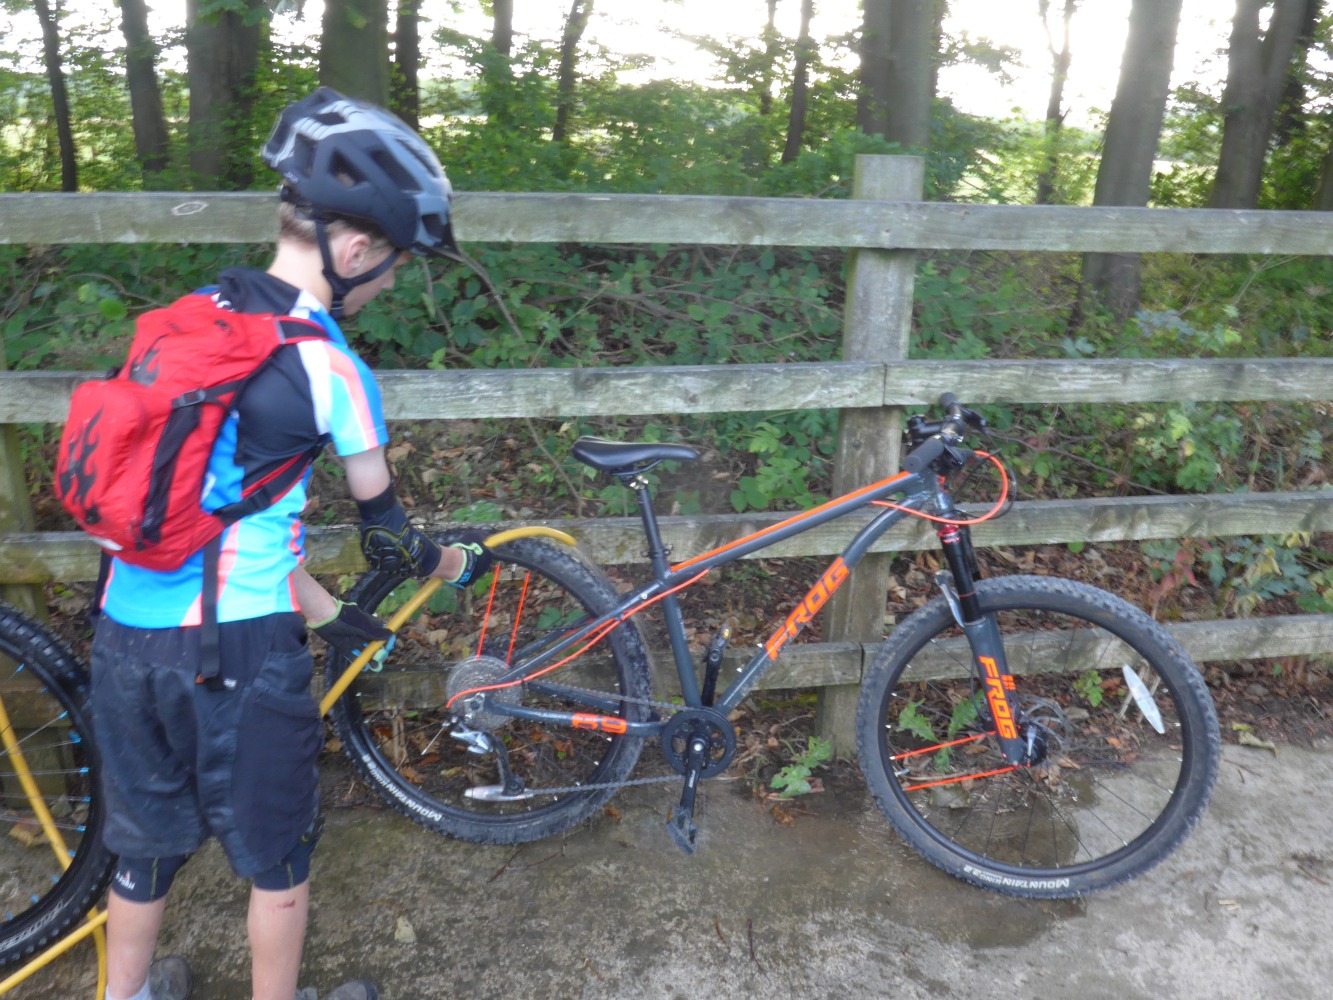 boy cleaning a mountain bike with a hose